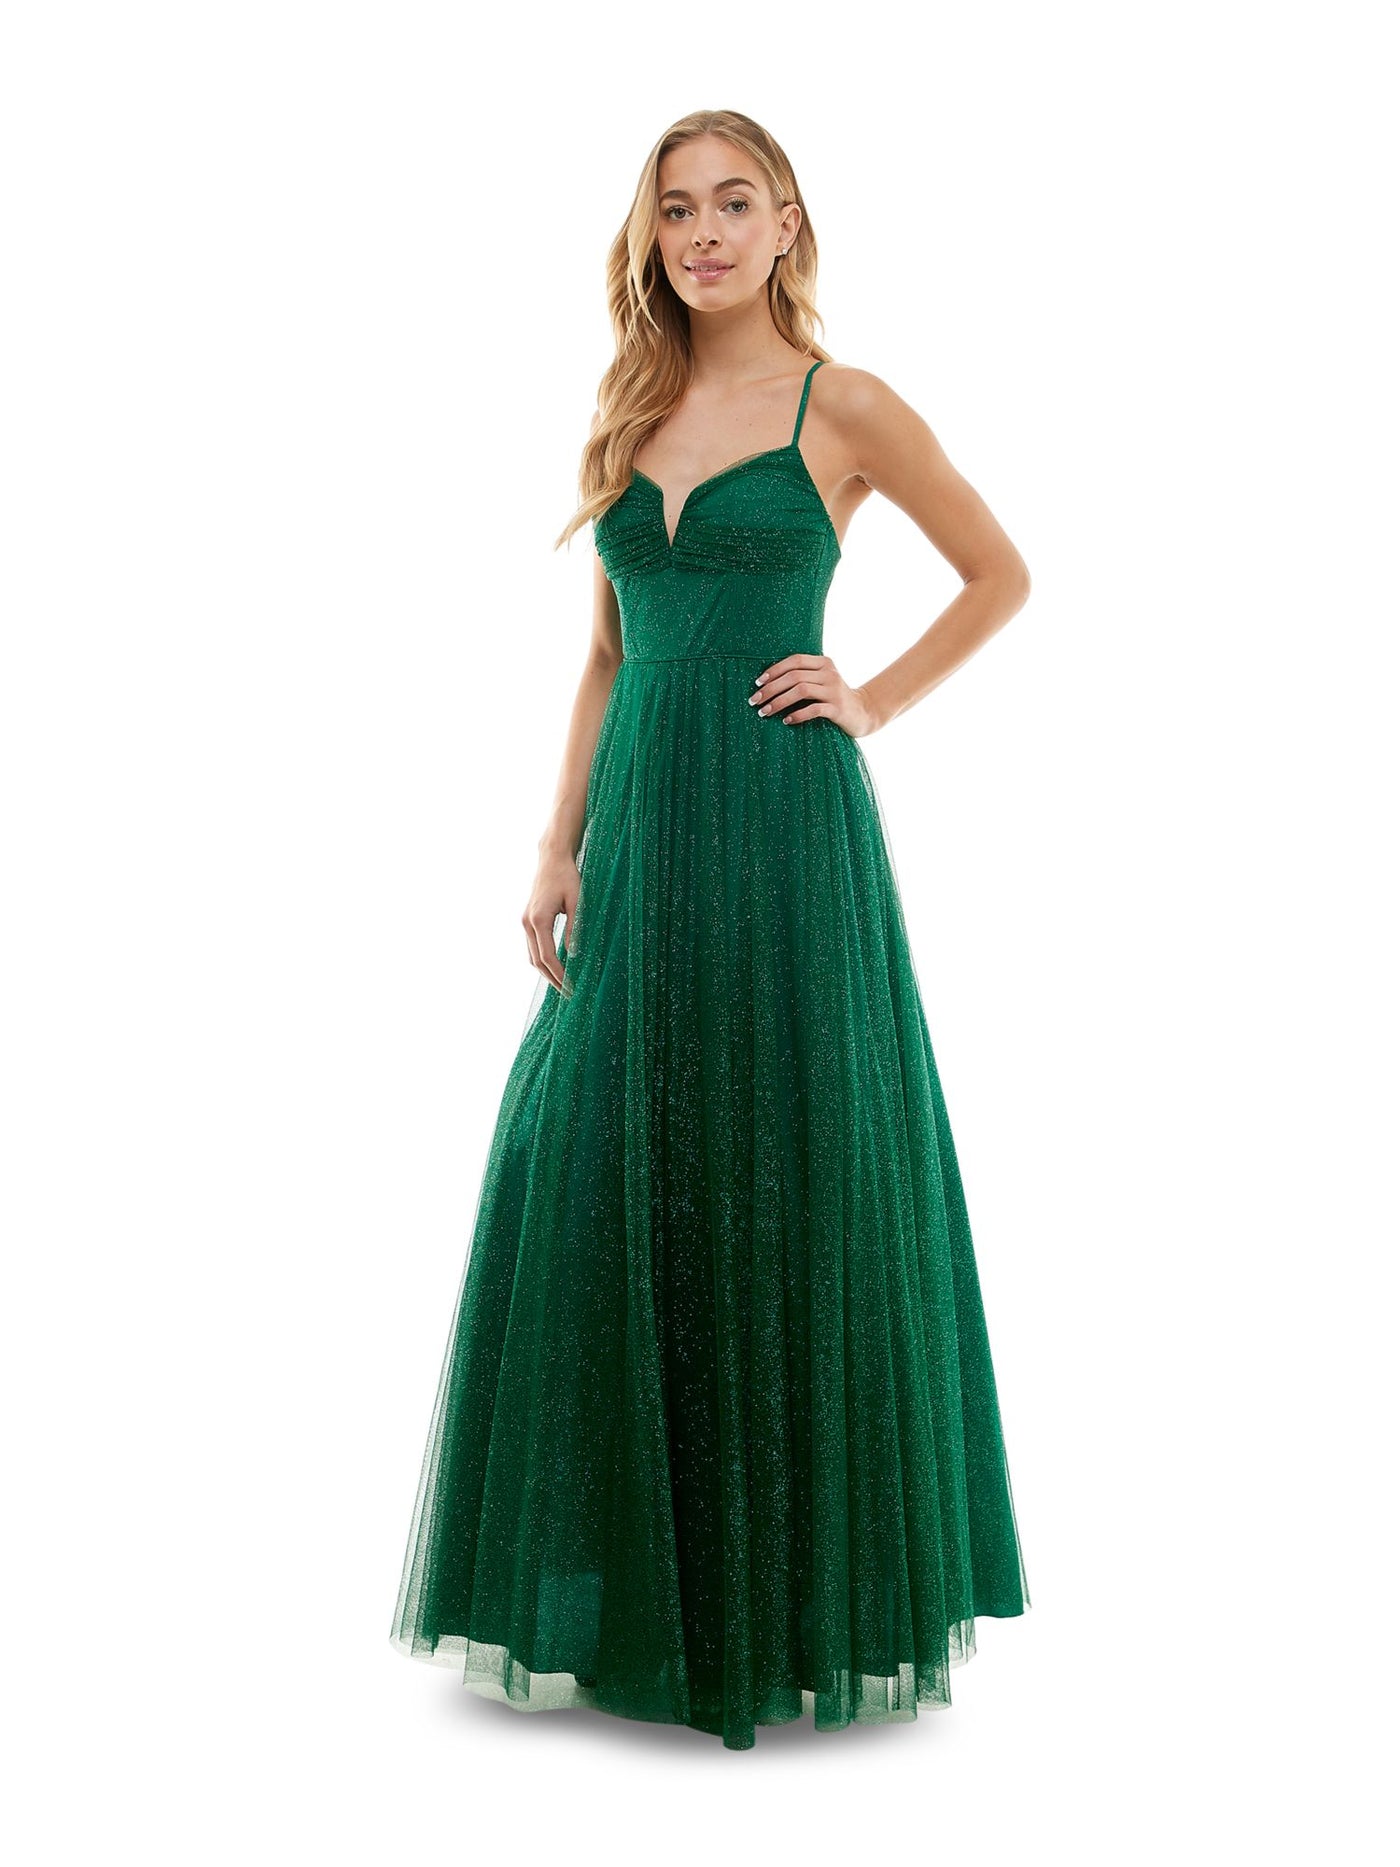 CITY STUDIO Womens Green Pleated Zippered Notched Neckline Lined Sleeveless Full-Length Formal Gown Dress Juniors 1